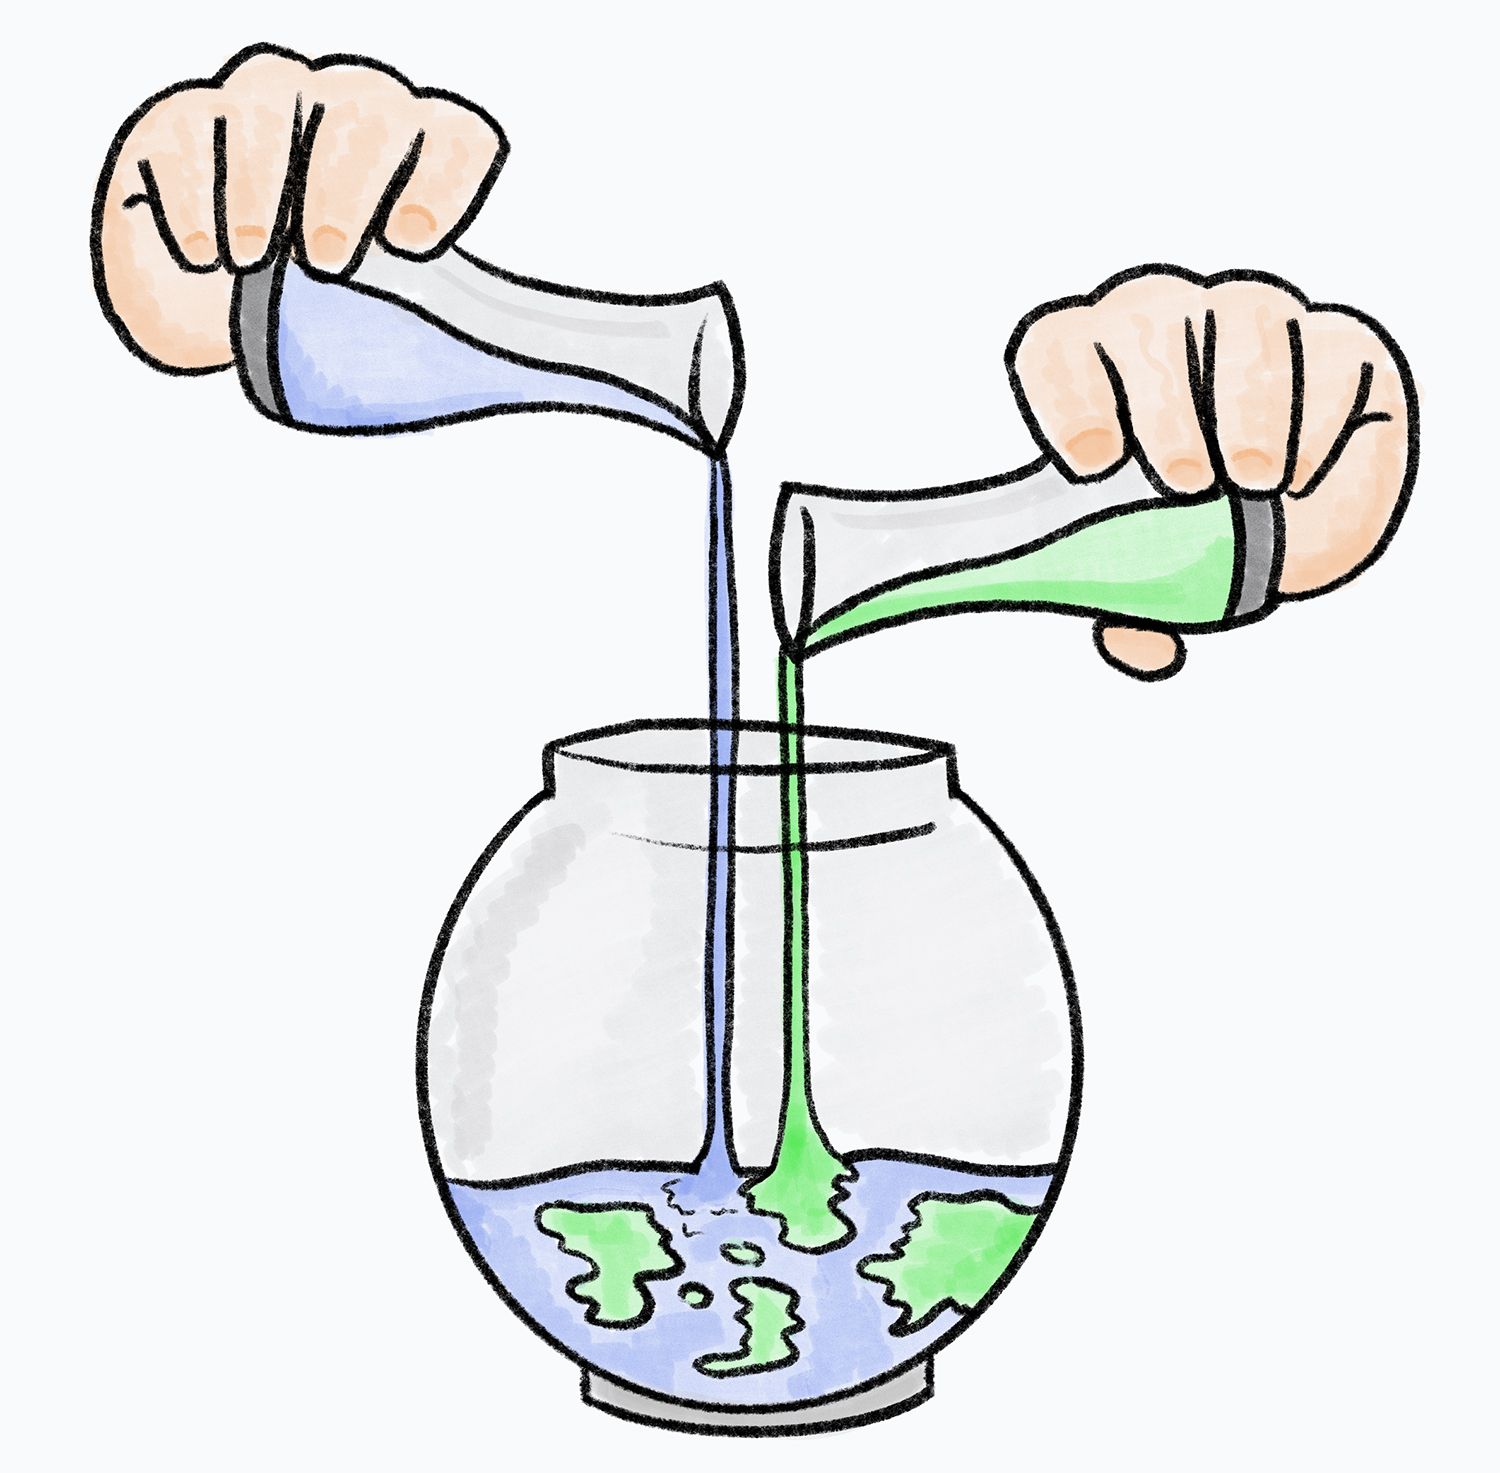 An image of two hands pouring liquid into a spherical bowl. The liquids are blue and green, representing landmass and water. The bowl is being filled up, like a globe.